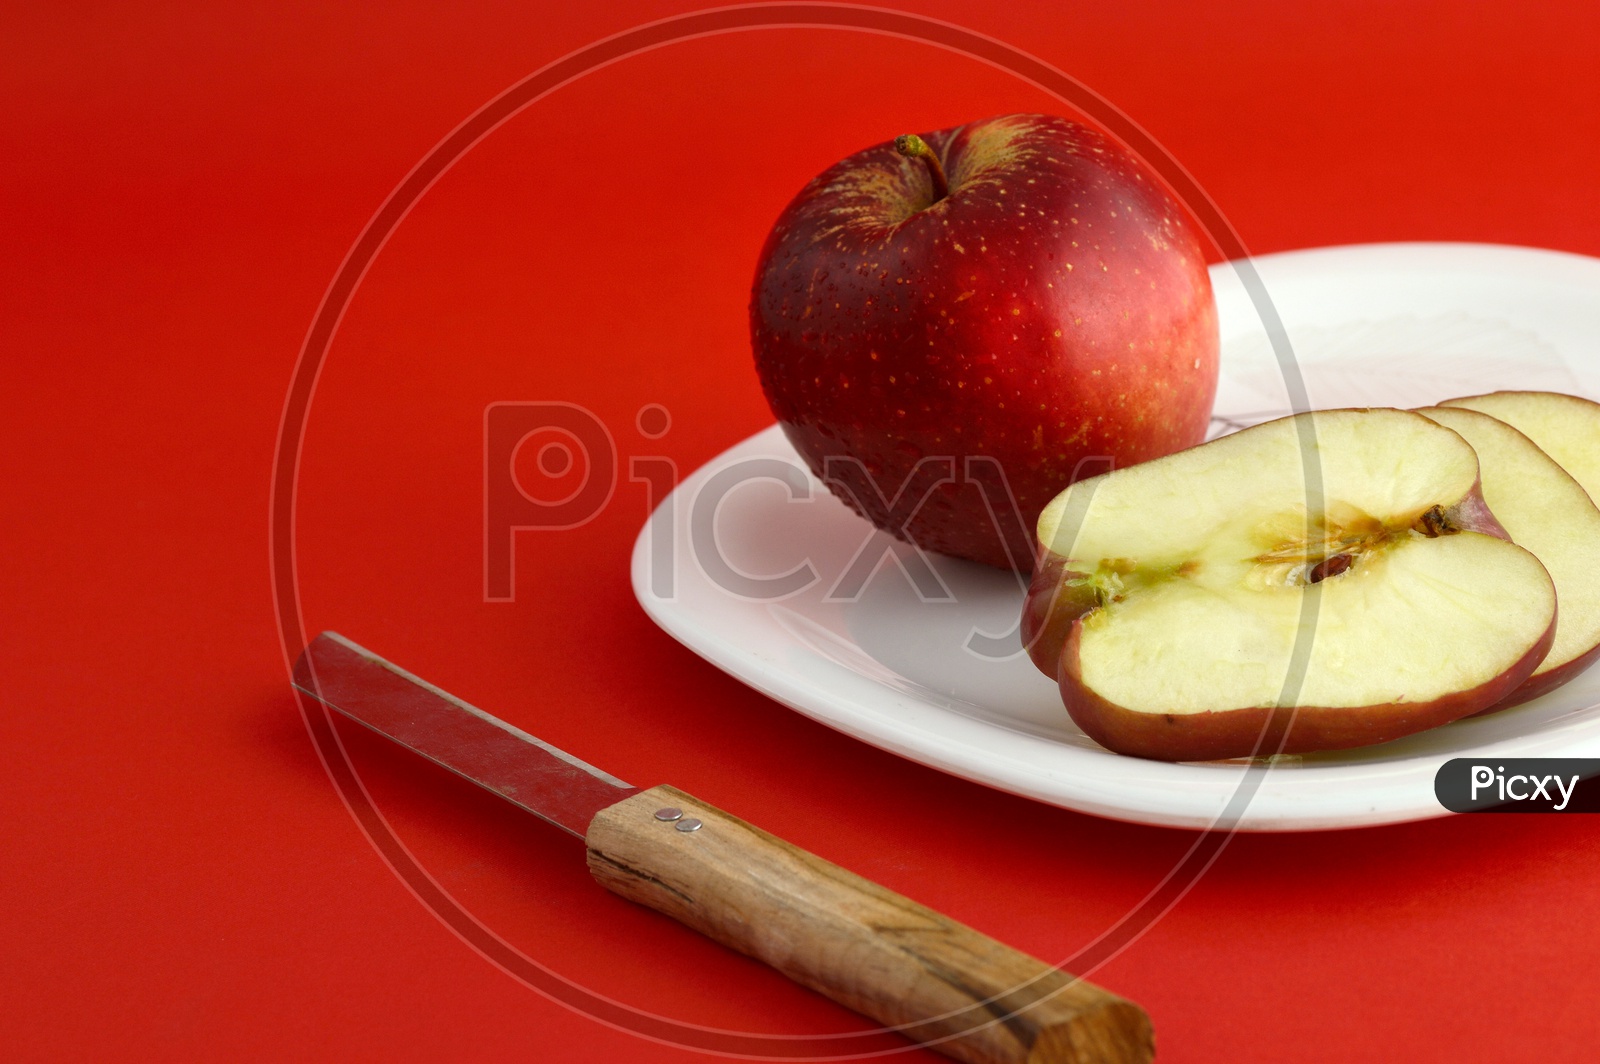 Ripen Red Apple Slices On White Plate With Knife  Over an Isolated Red Background